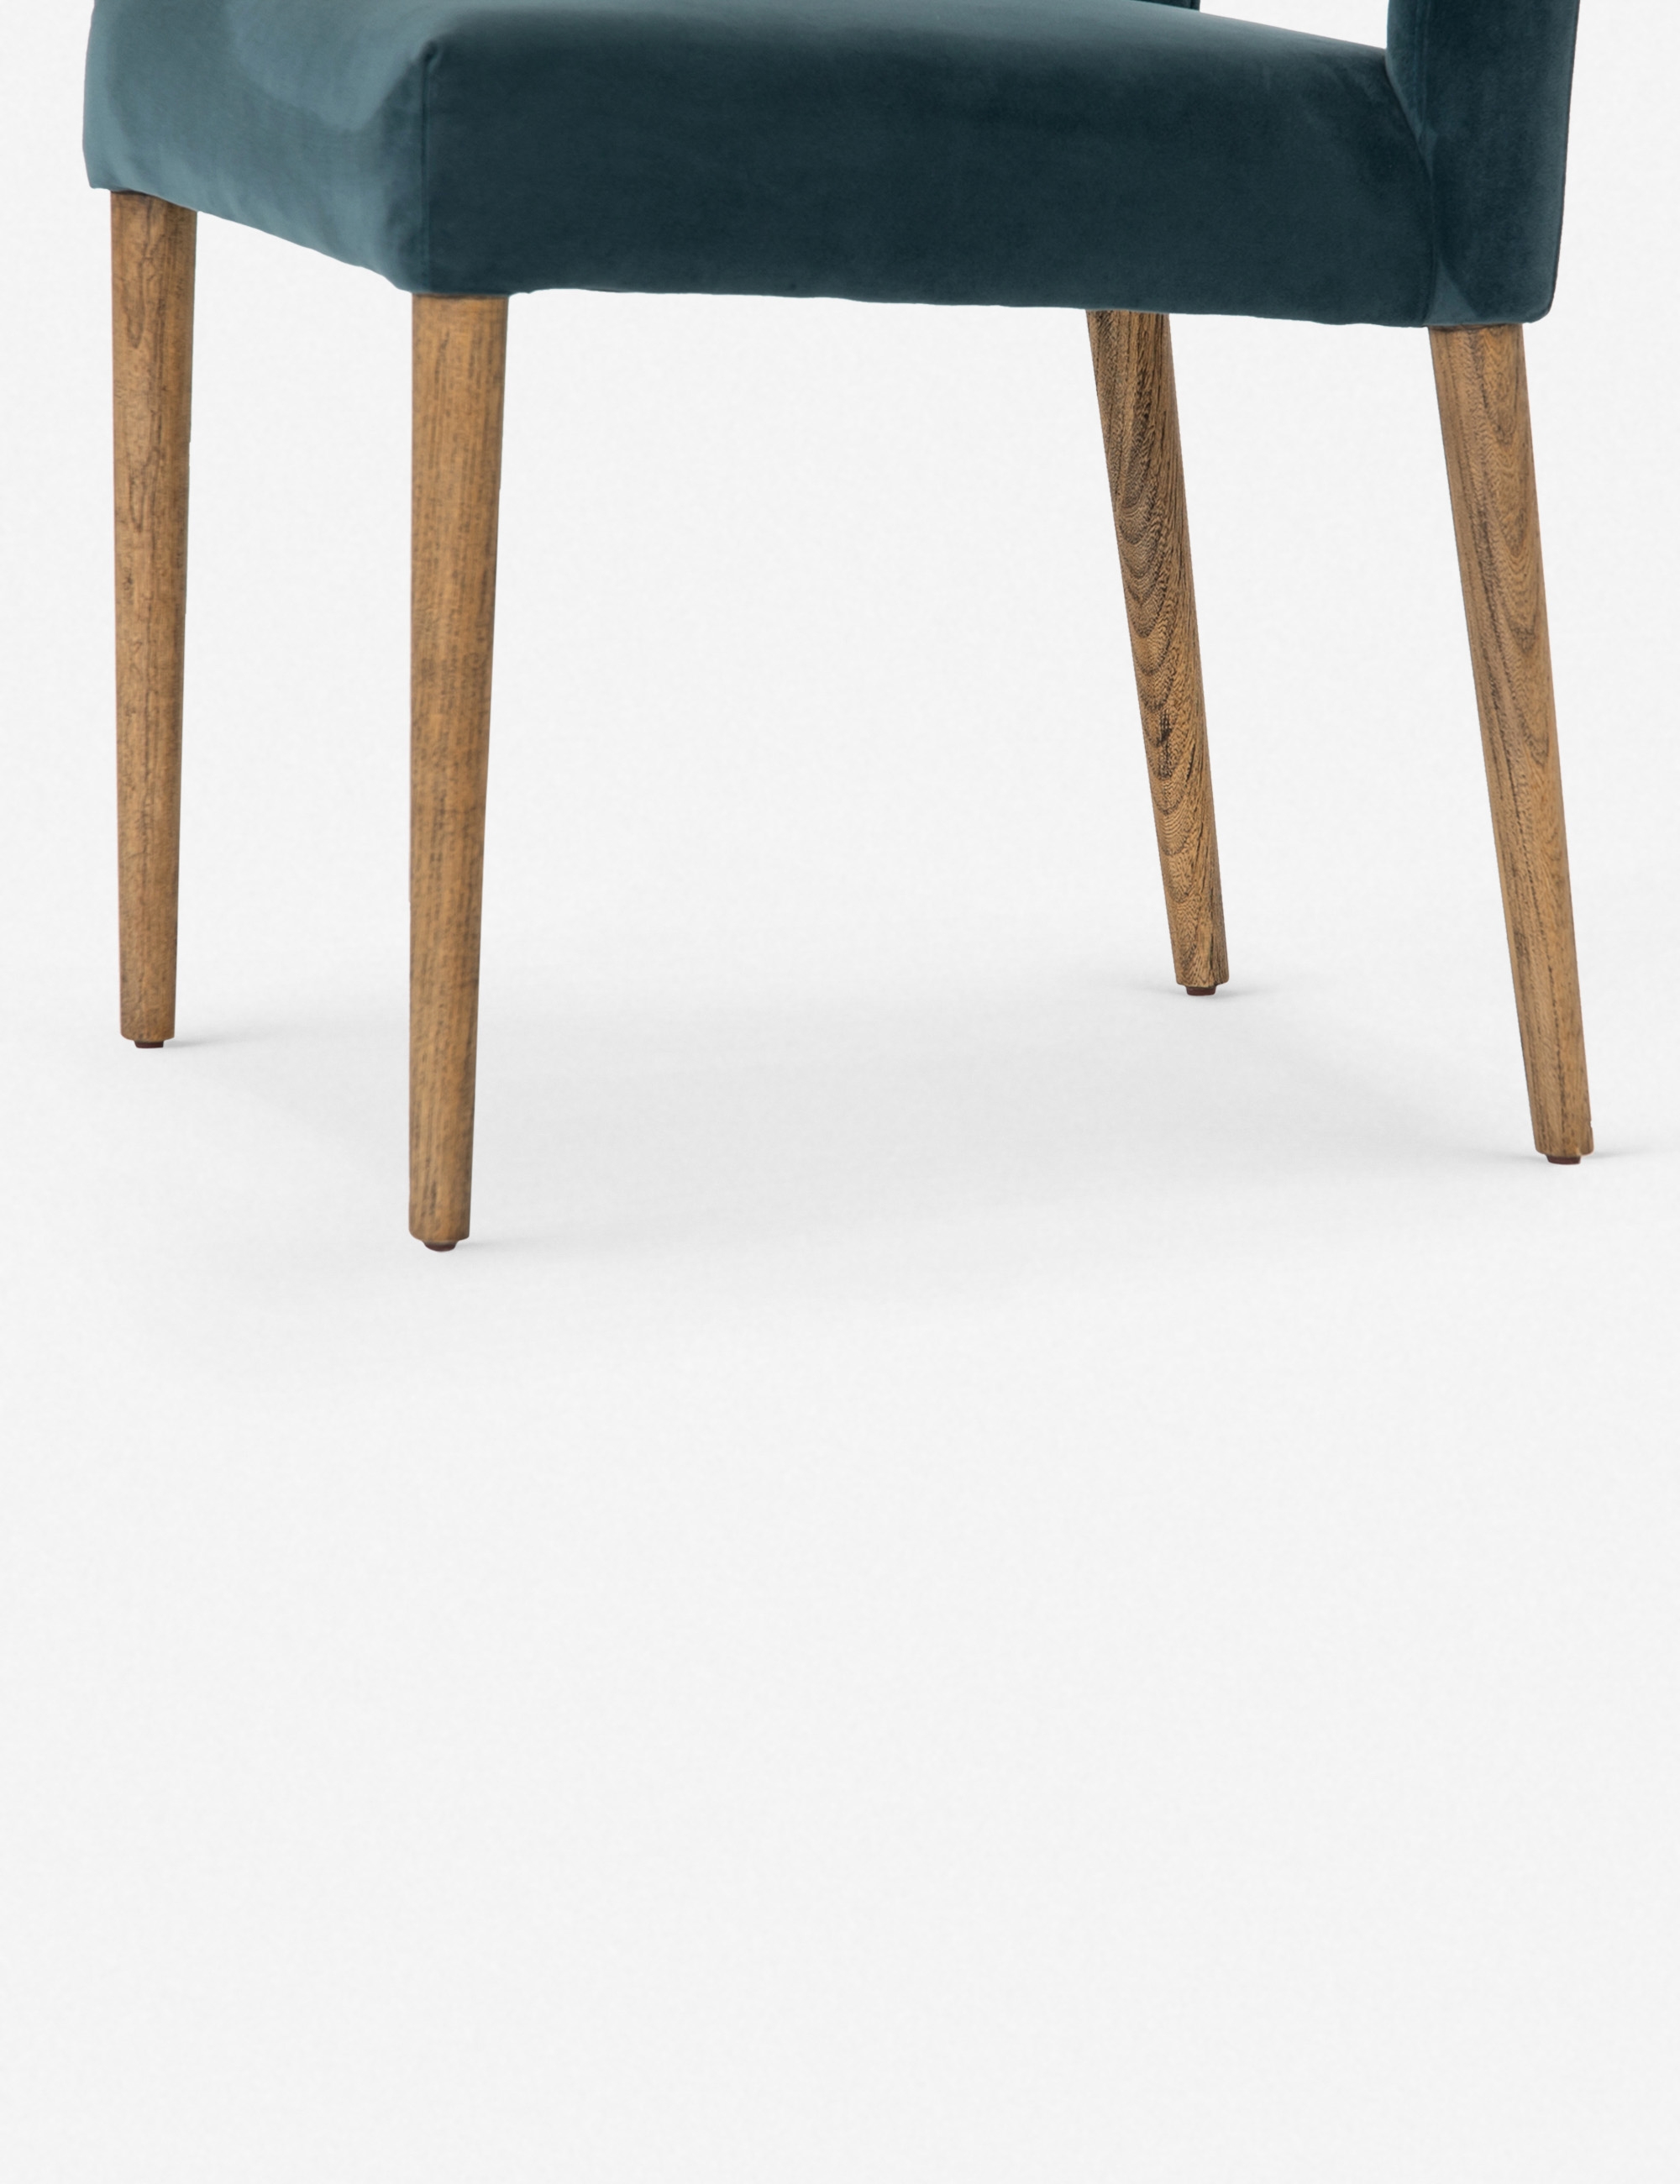 Ninette Dining Chair, Turquoise - Image 3